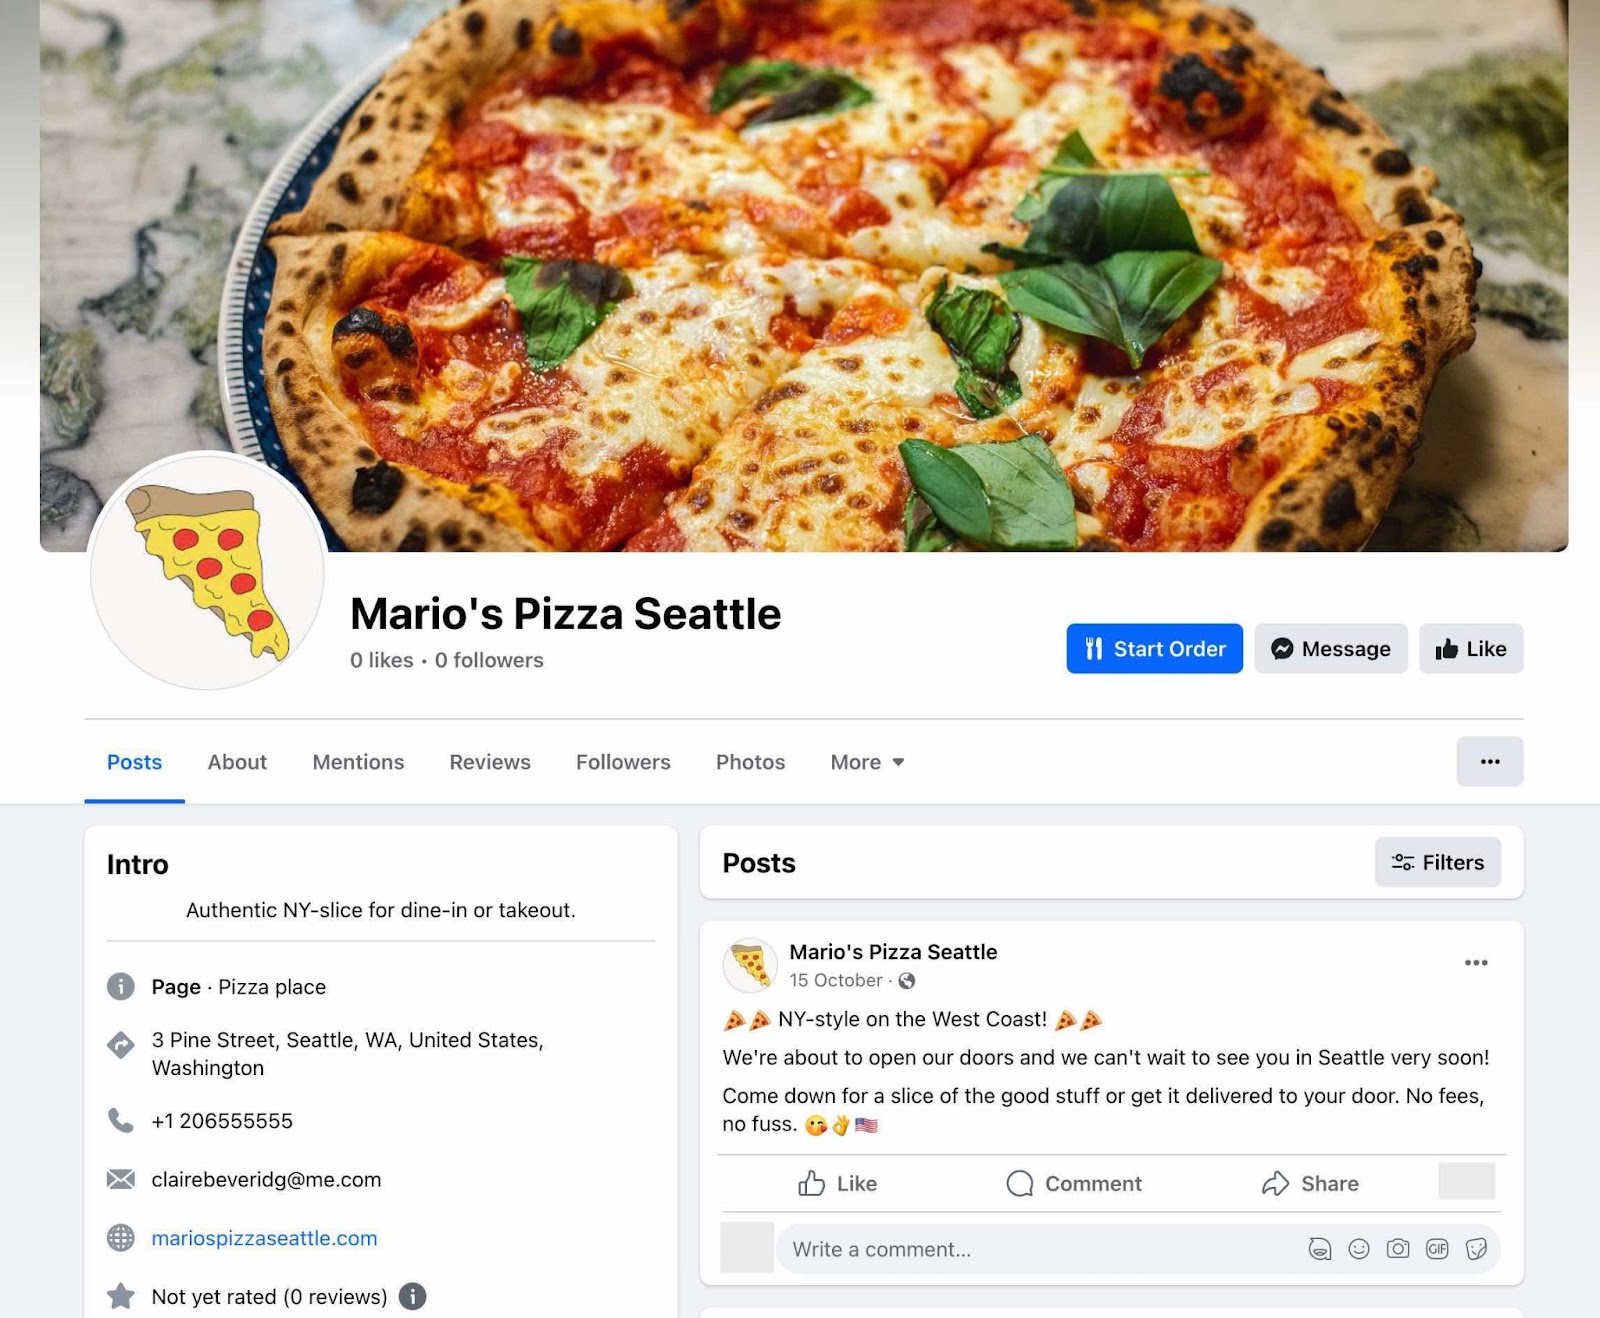 Mario's Pizza Seattle Facebook page